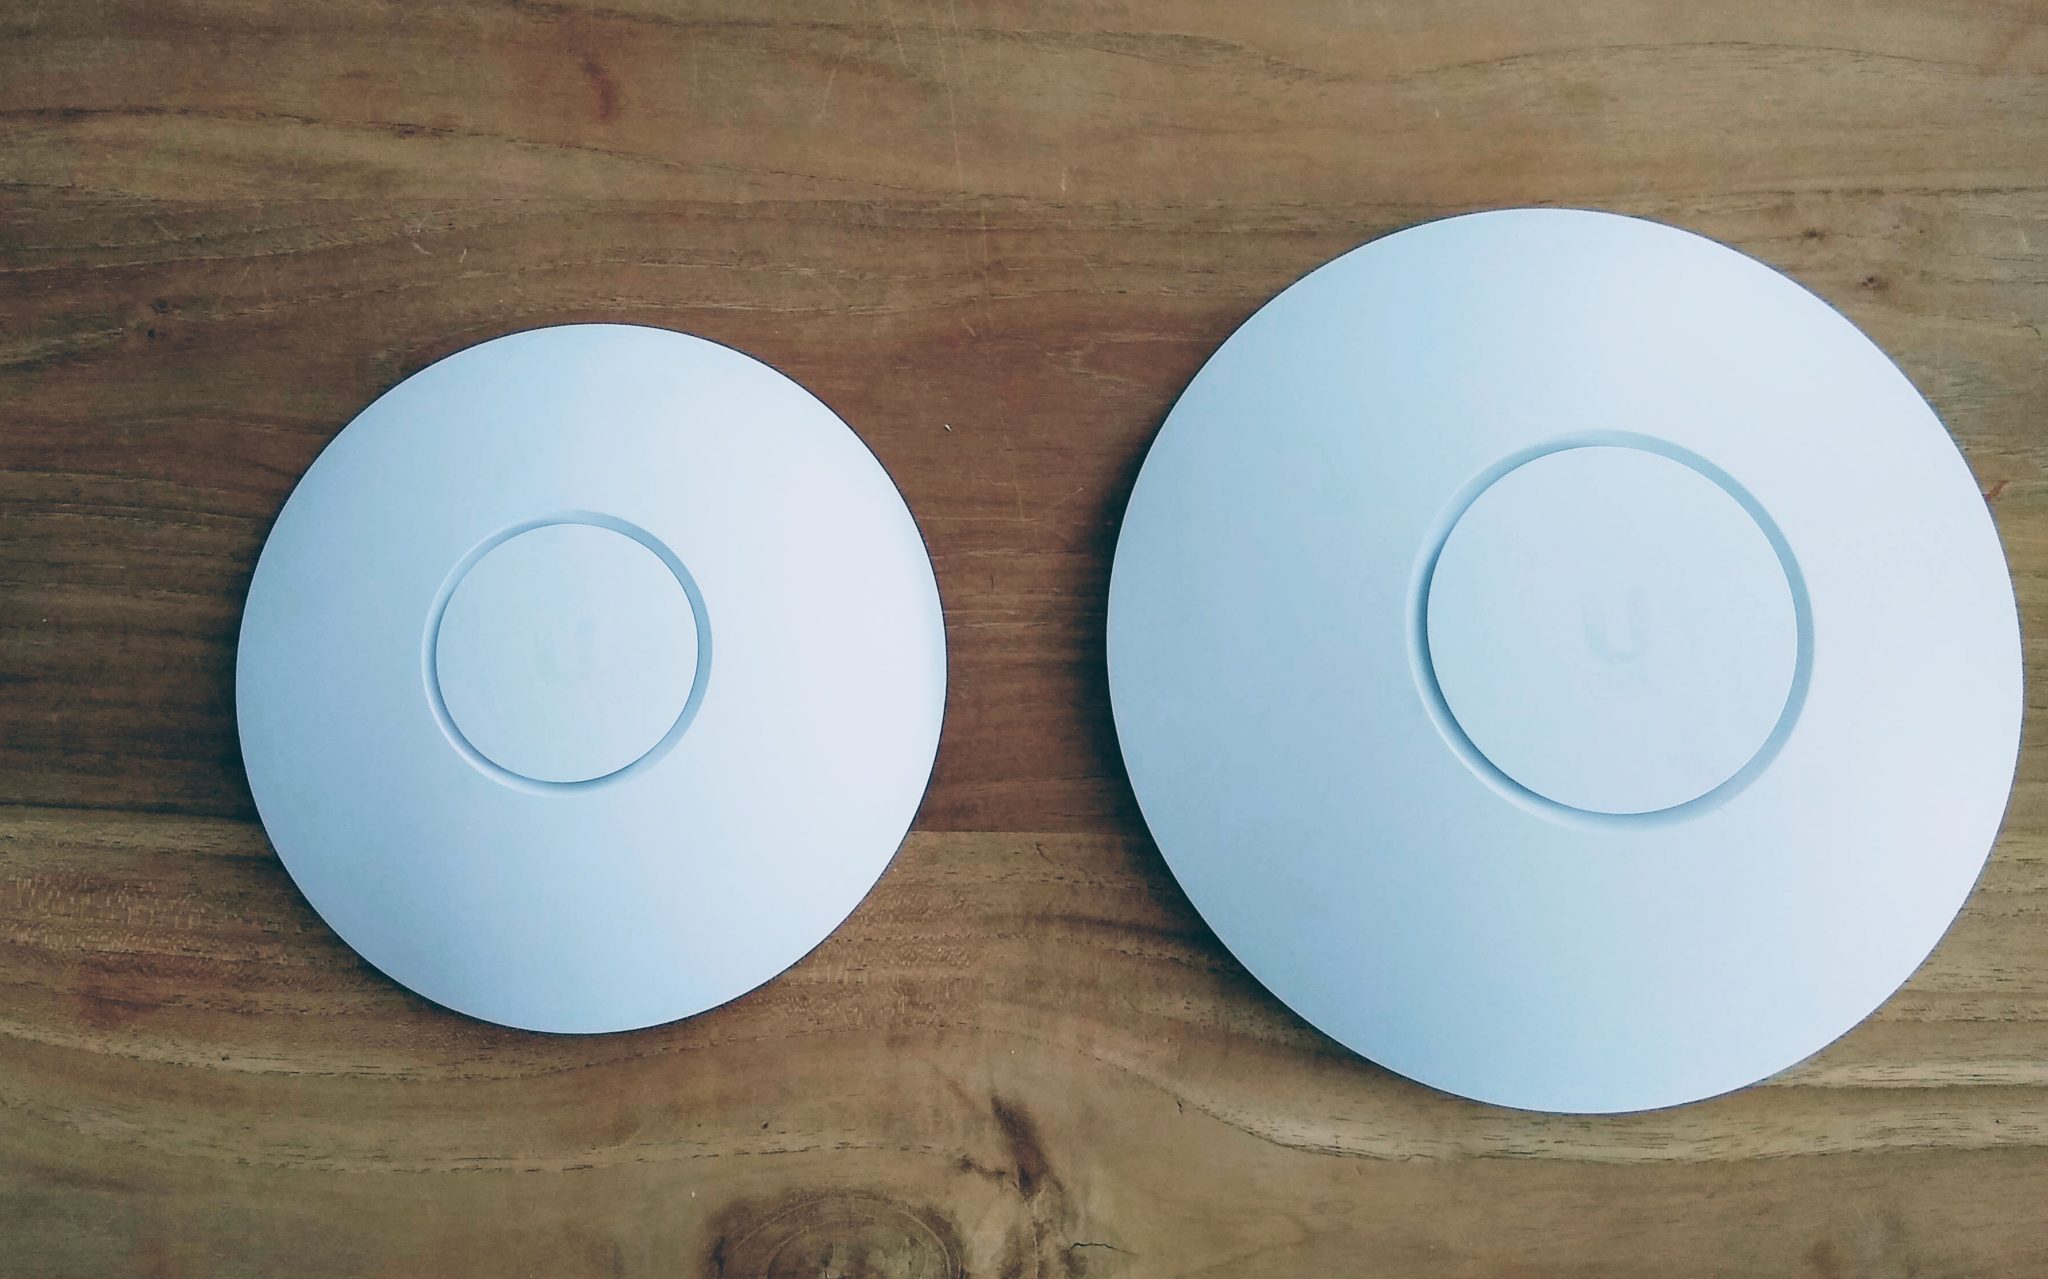 UniFi 6 Lite and LR Review, Comparision and Benchmarks — LazyAdmin